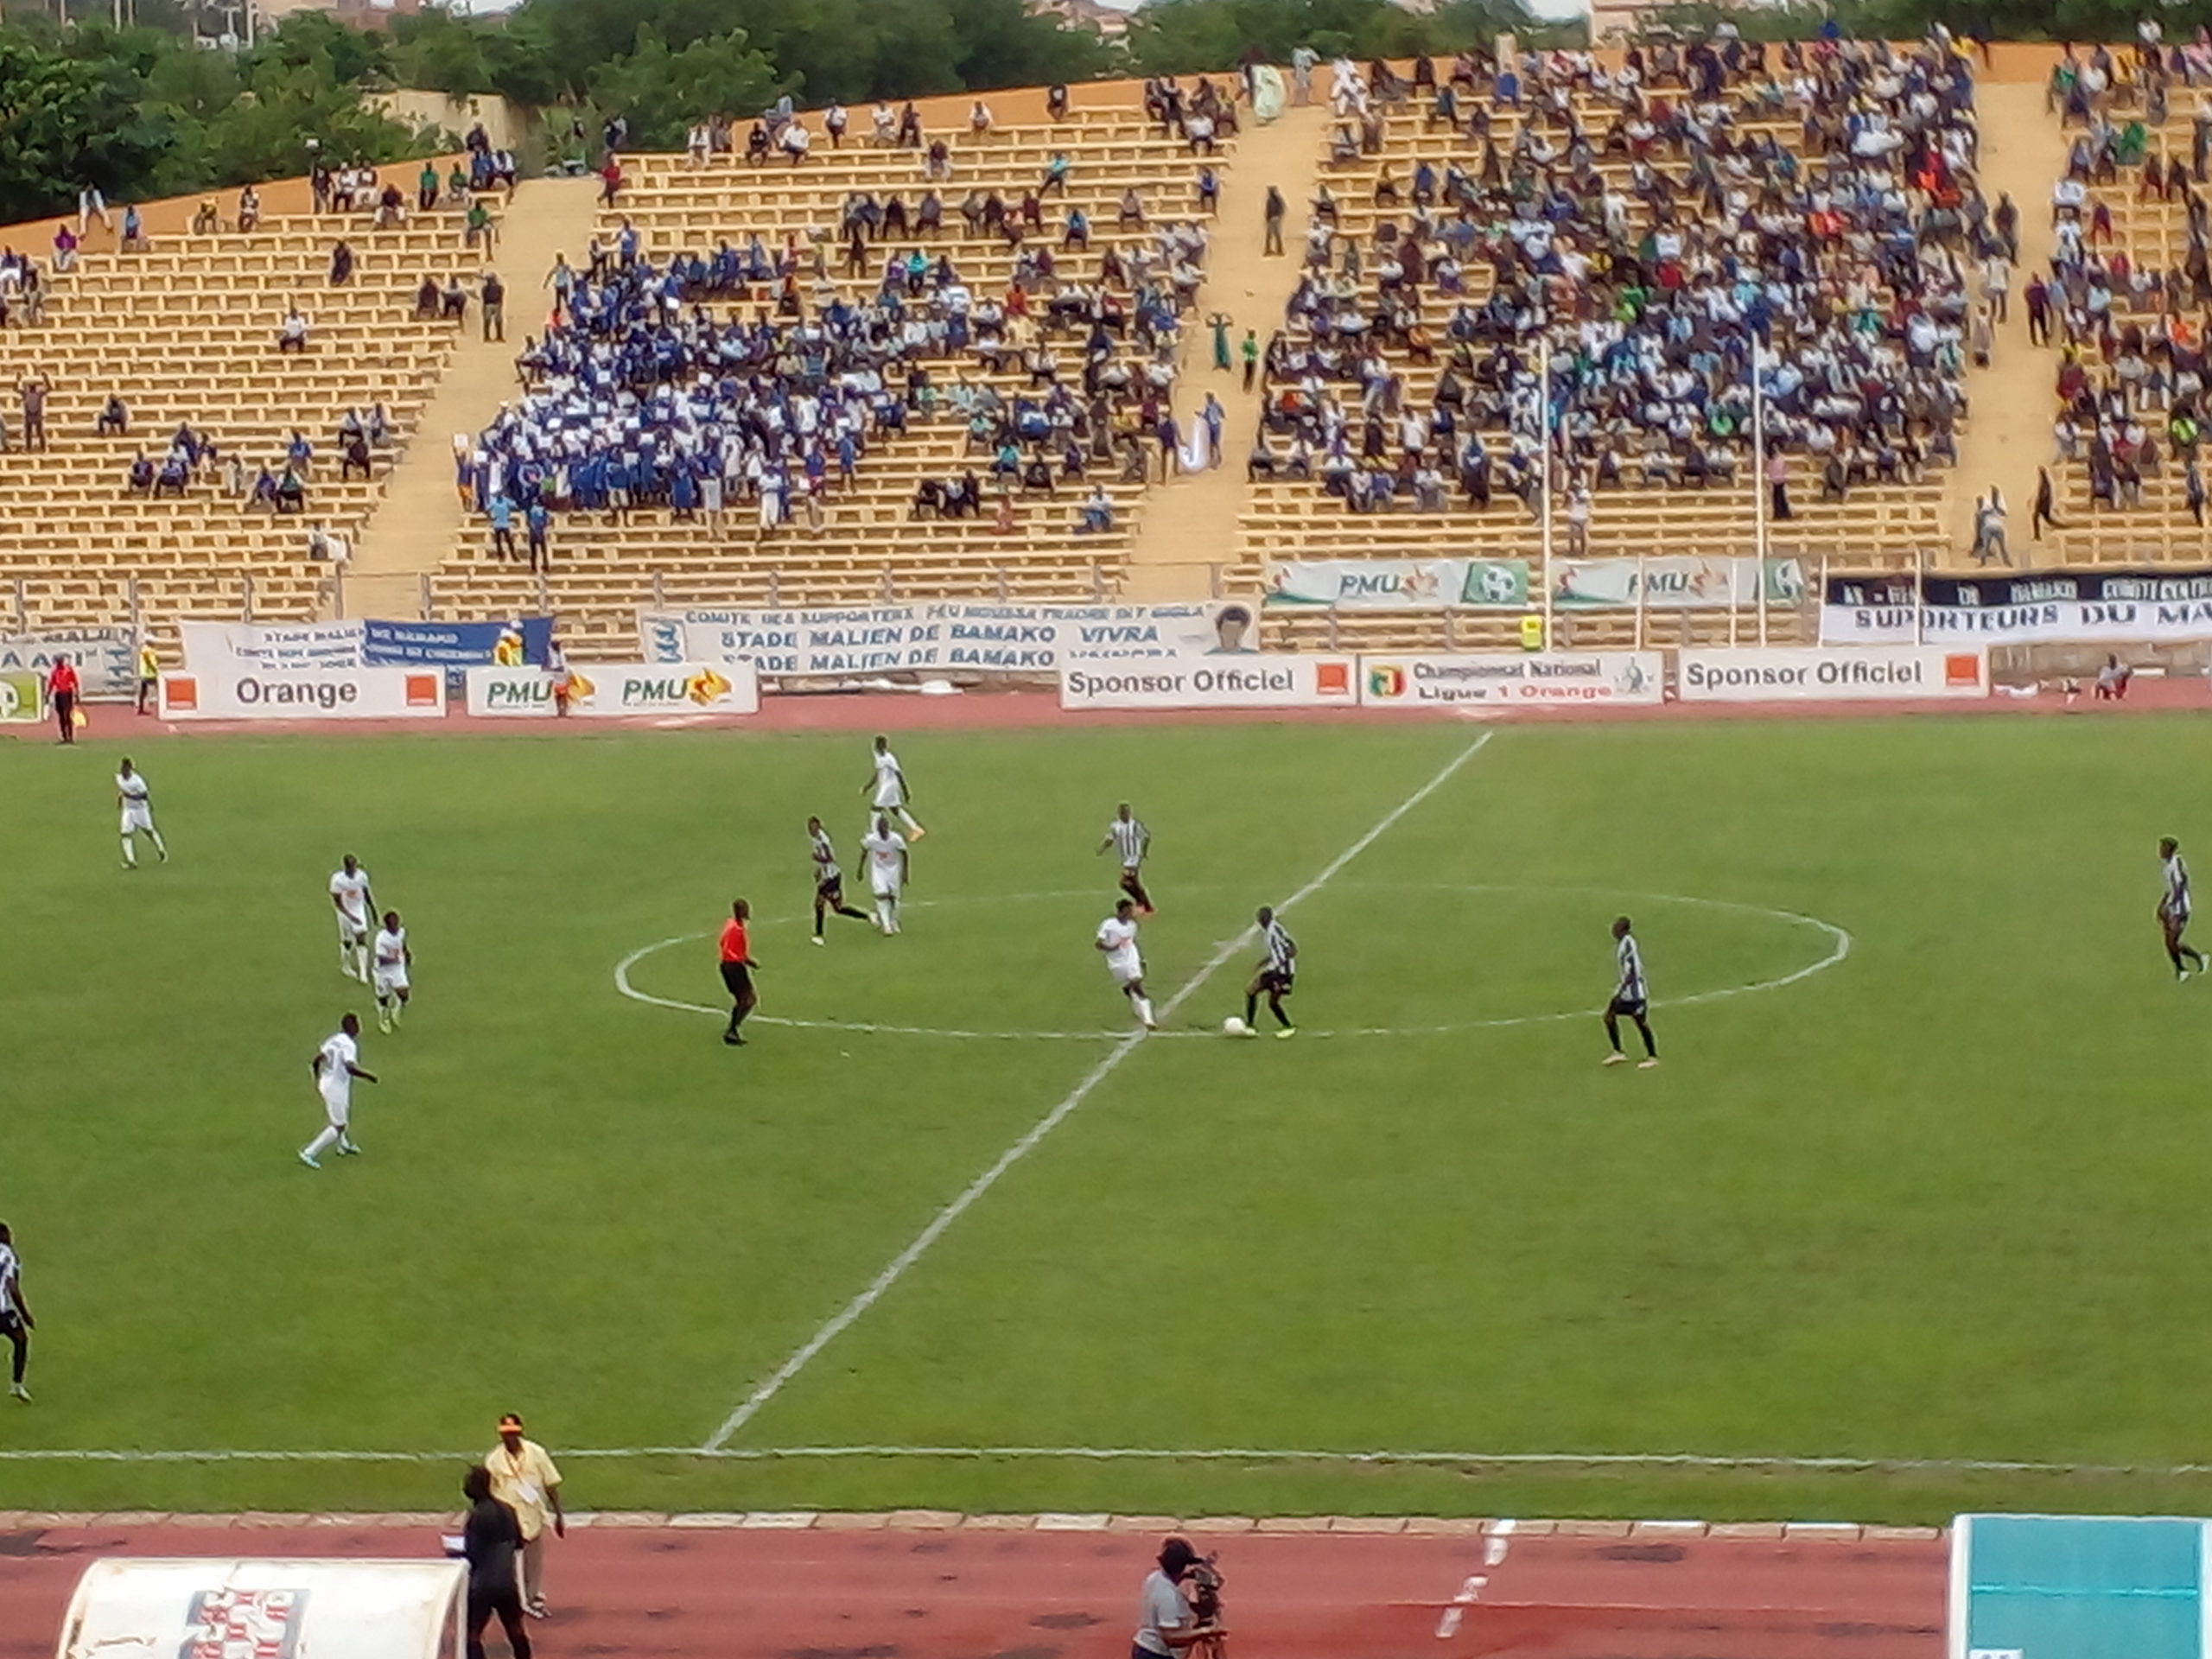  A football match at the Stade Malien in Bamako, Mali, with a large crowd in the stands.